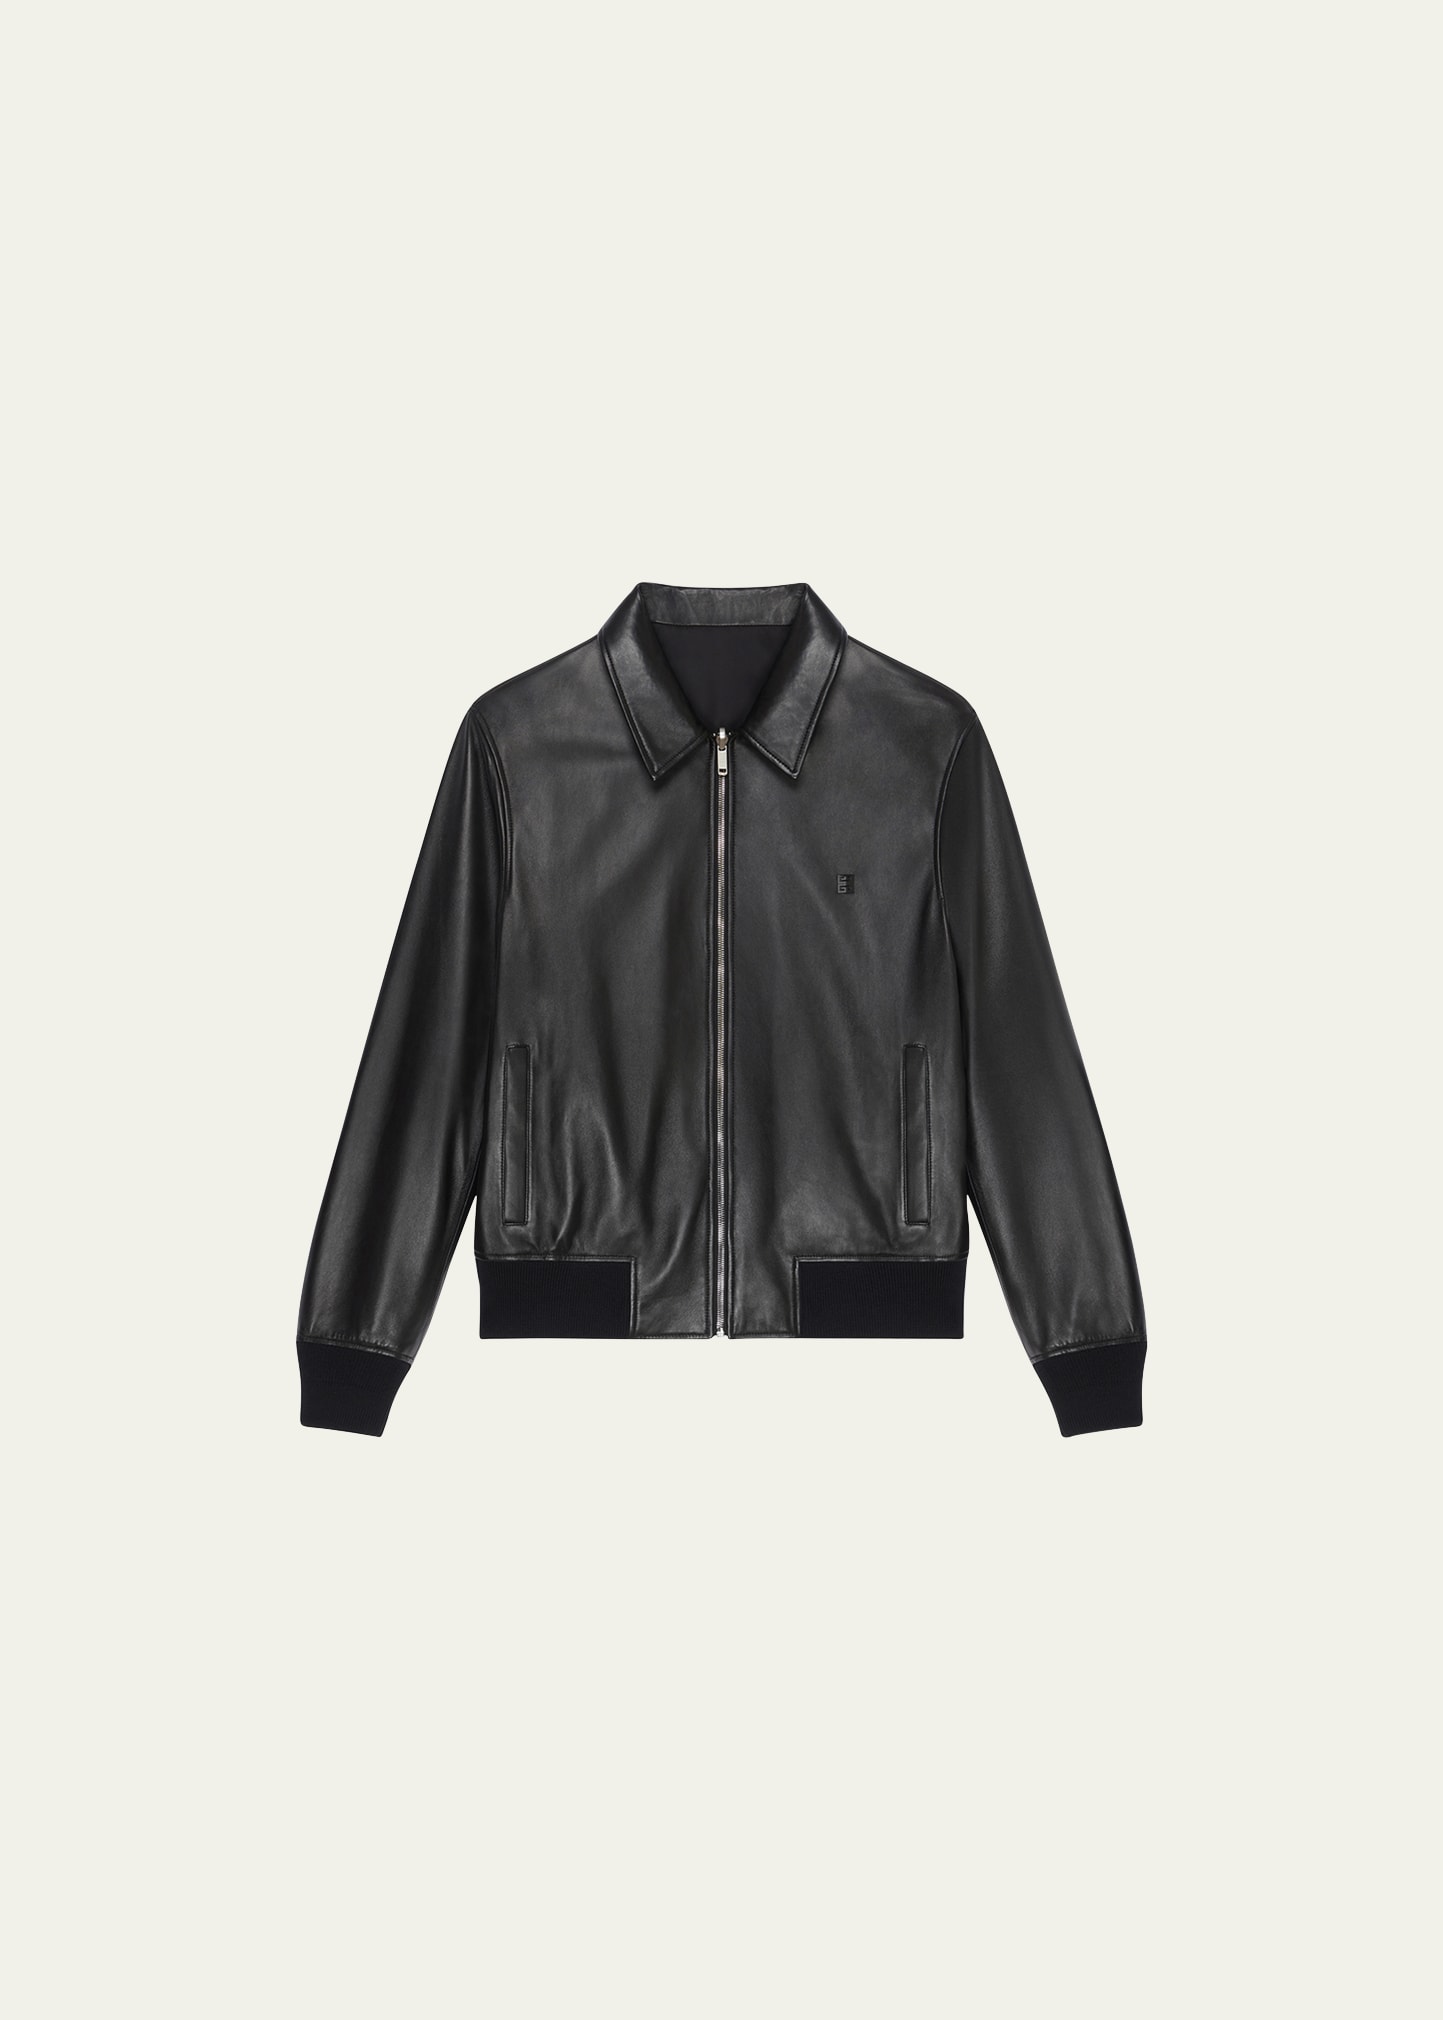 Givenchy Men's Reversible Leather And Polyester Bomber Jacket In Black